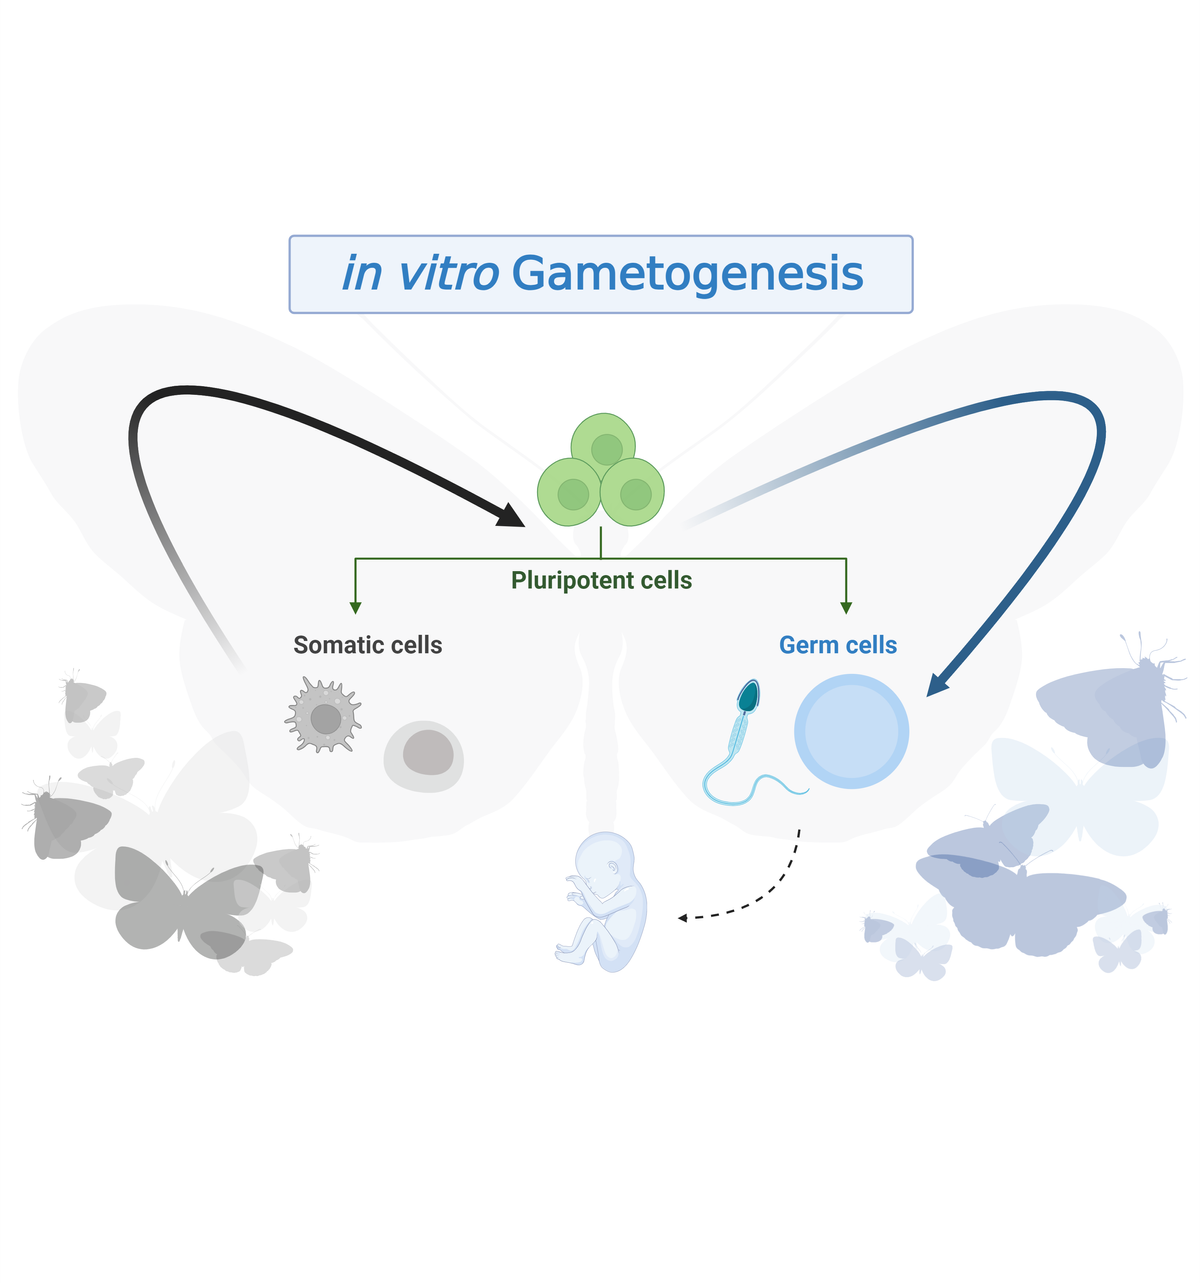 In vitro Gametogenesis: The Next Frontier  in Human Health Biotechnology